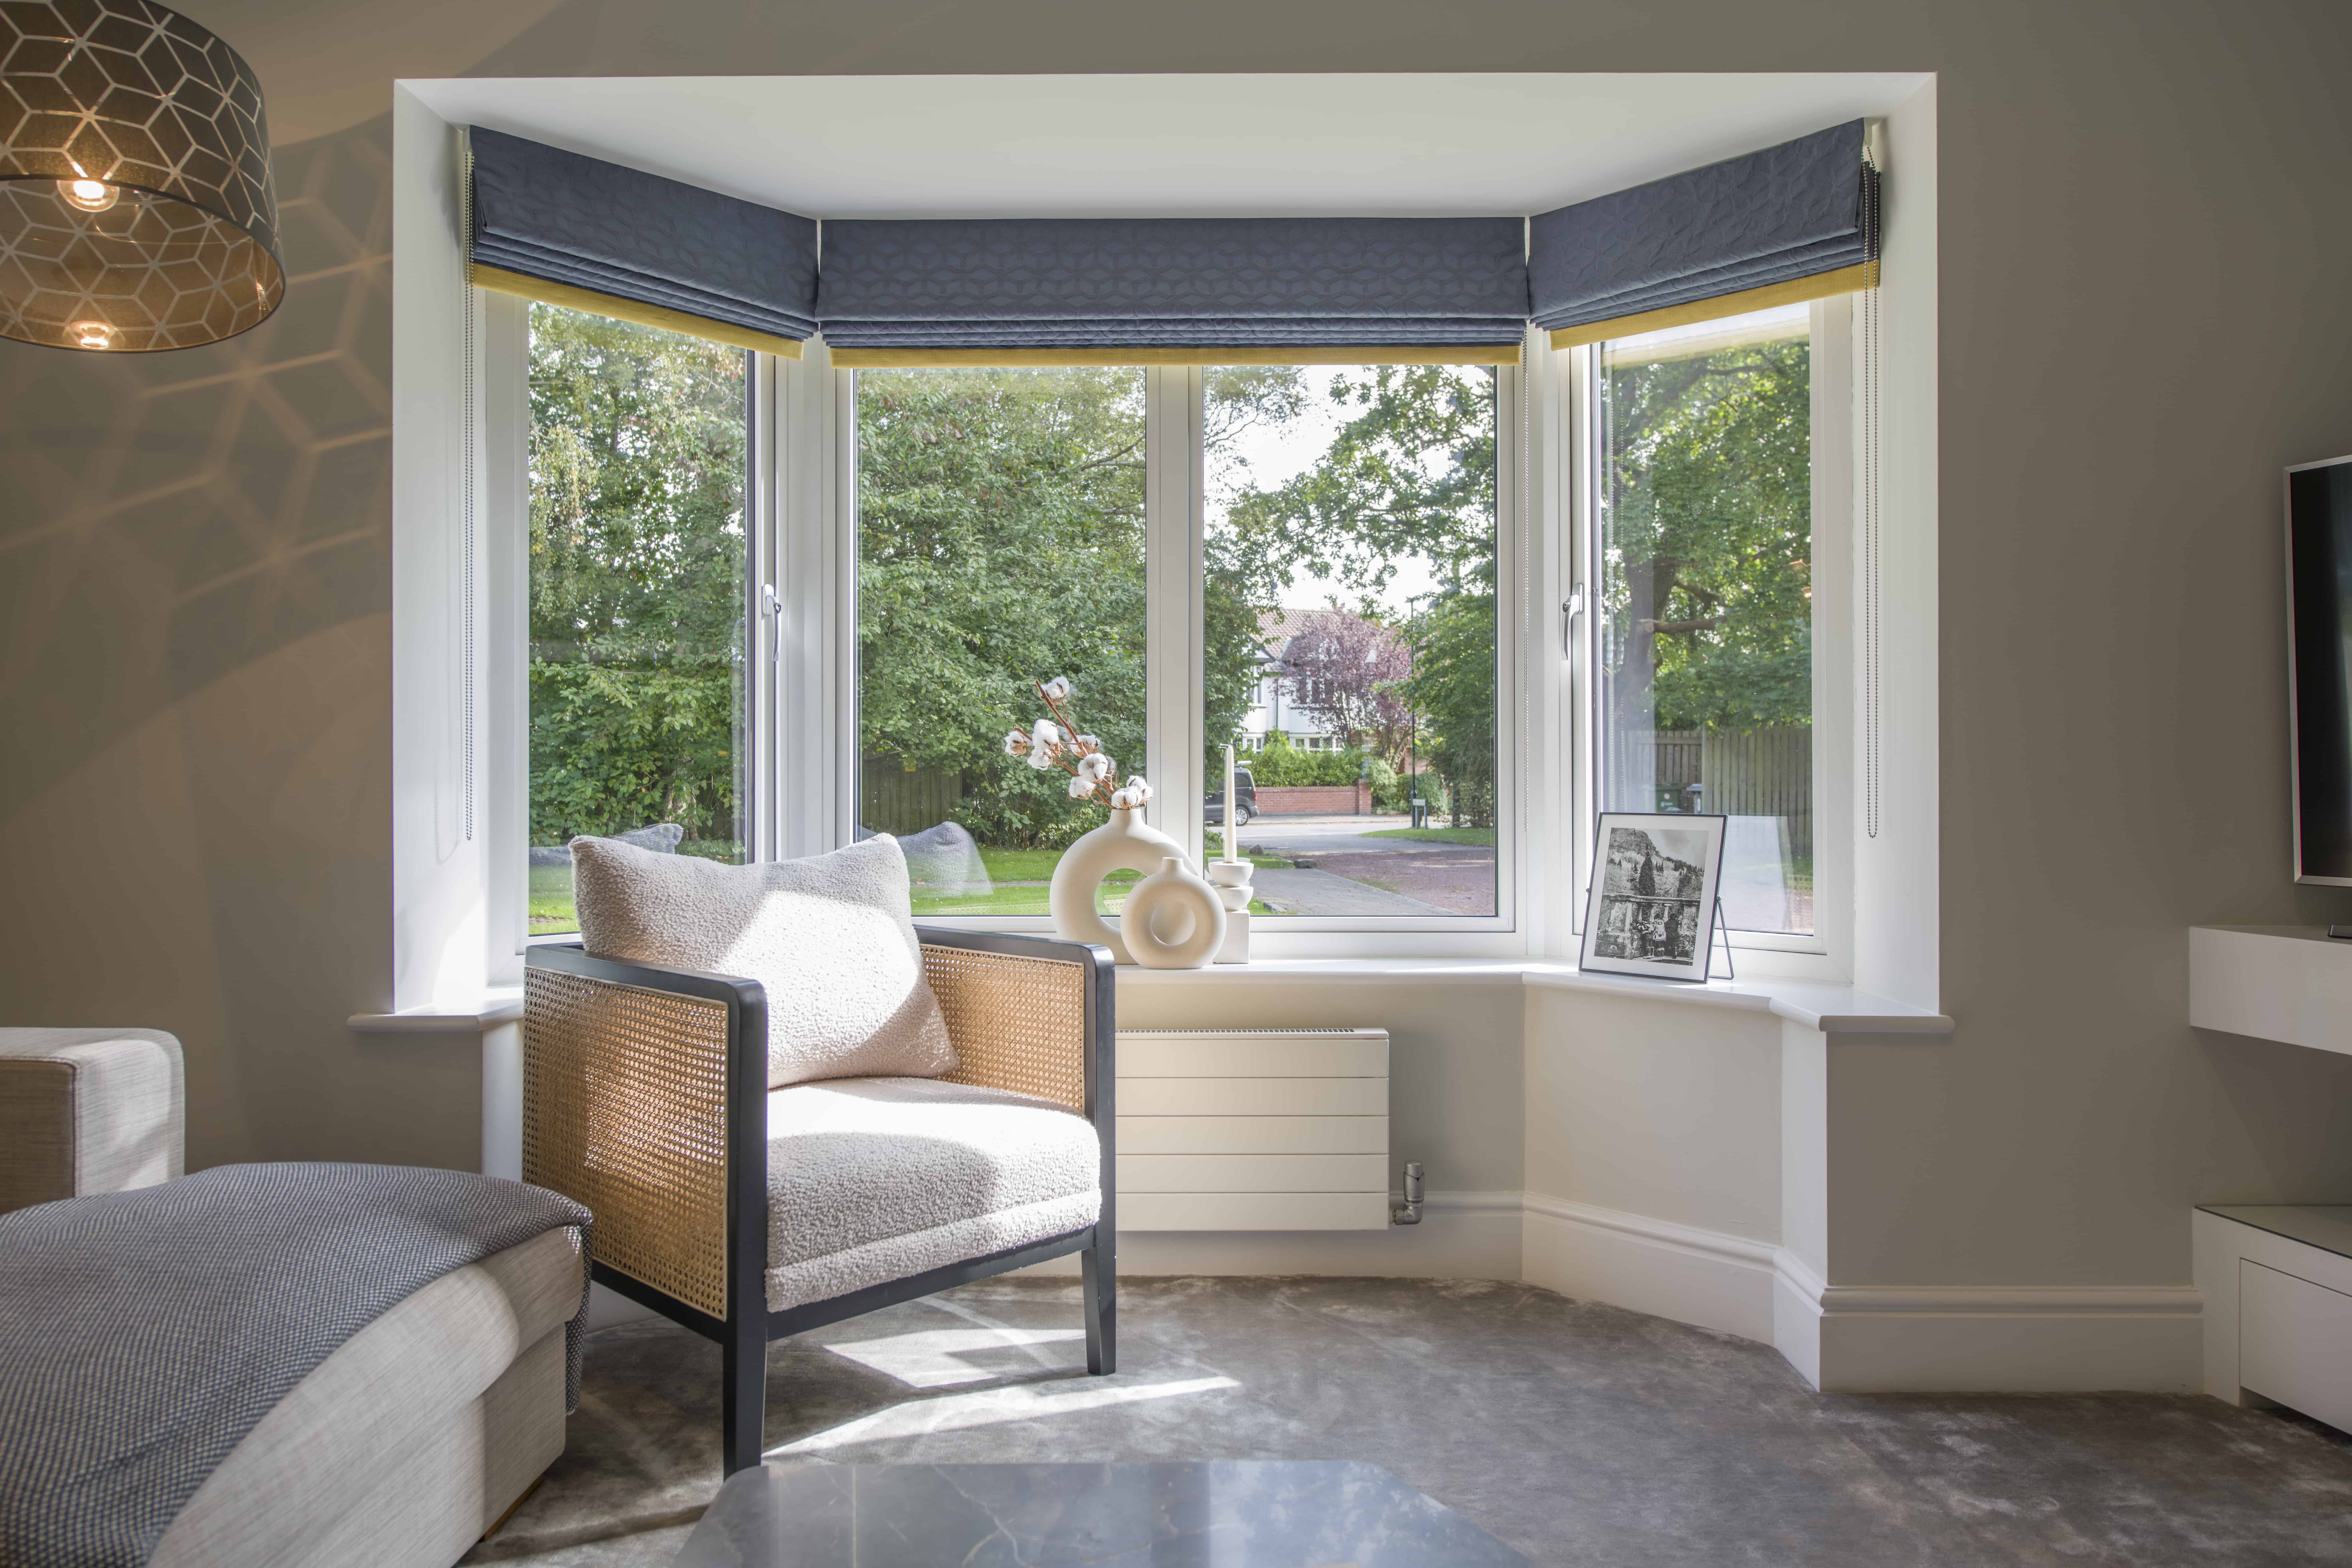 Before and After: New Bay Window with Built-In Blinds